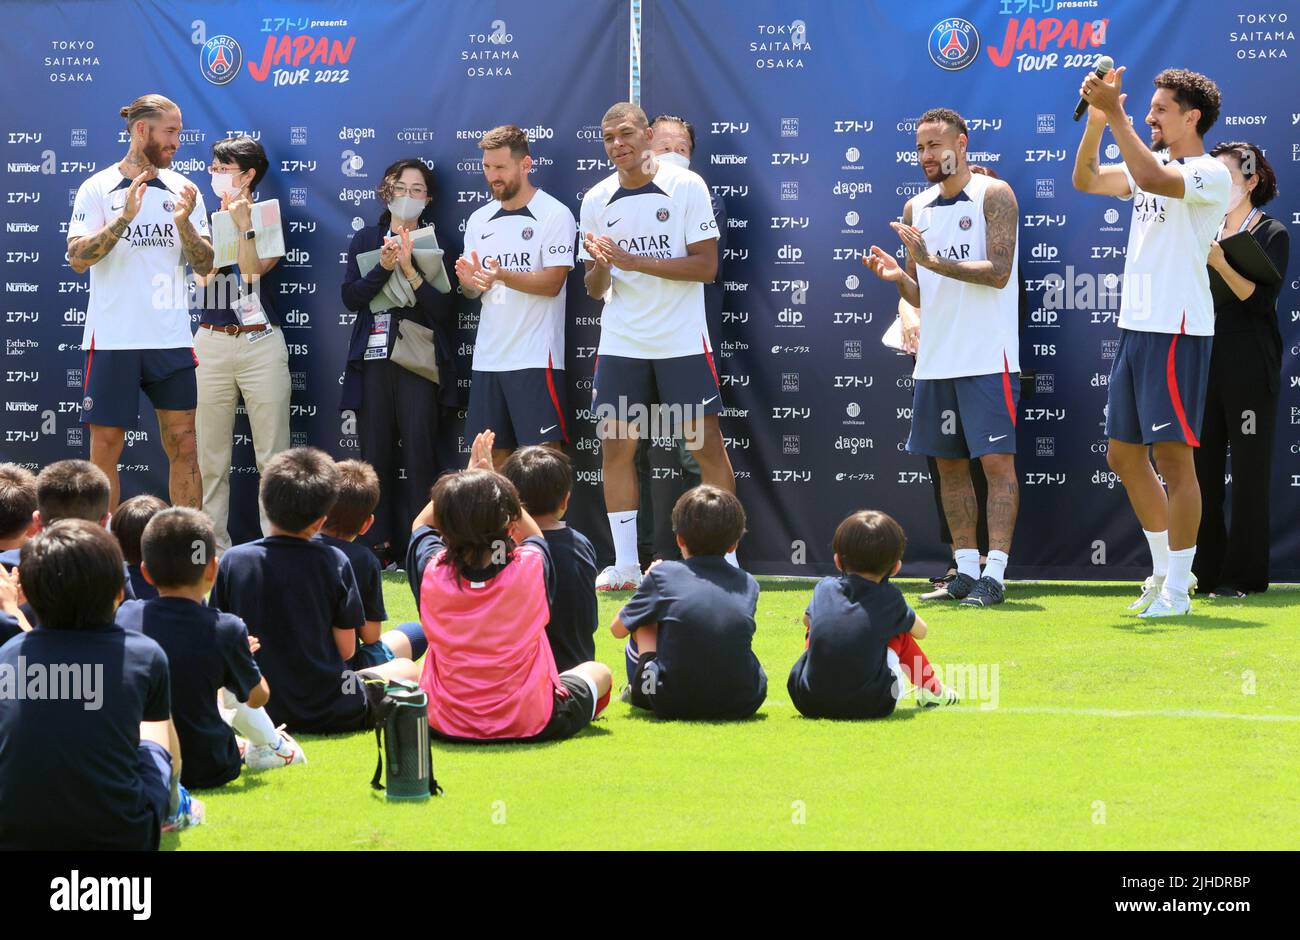 Tokyo, Japan. 18th July, 2022. (L-R) French football club team Paris Saint-Germain star players Sergio Ramos, Lionel Messi, Kylian Mbappe, Neymar Jr and Marquinhos clap their hands after they give a football clinic for children at the Prince Chichibu Rugby Field in Tokyo on Monday, July 18, 2022. Paris Saint-Germain will have games with Japanese club teams Kawasaki Frontale, Urawa Reds and Gamba Osaka for their Japan tour. Credit: Yoshio Tsunoda/AFLO/Alamy Live News Stock Photo